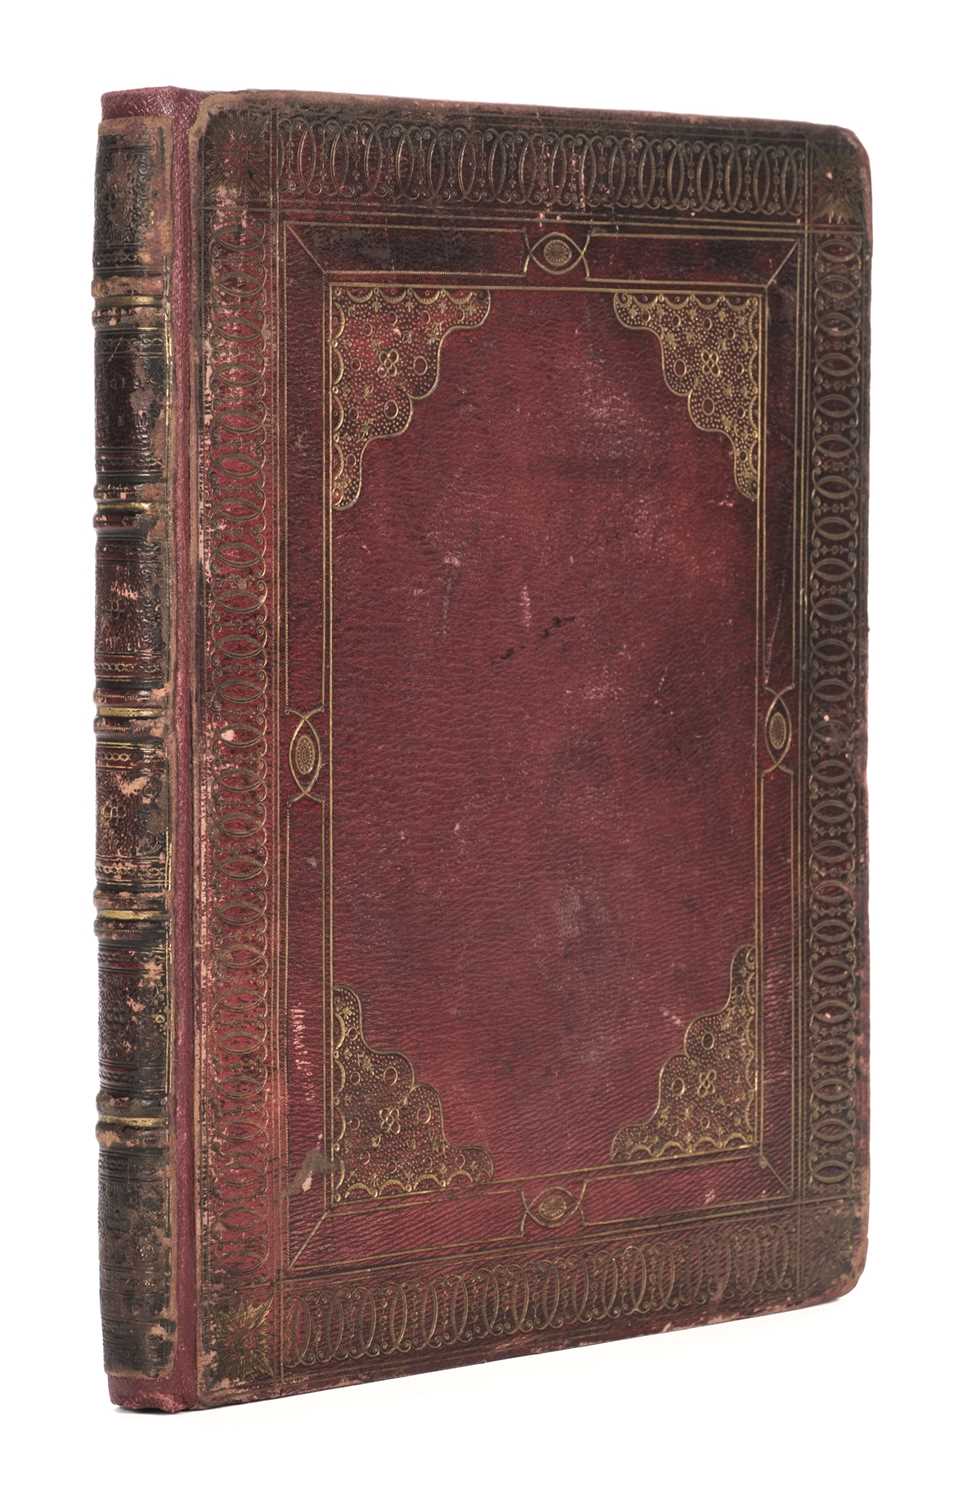 Lot 435 - Binding. The Birth and Triumph of Love. A Poem, by James Bland Burges, 1796